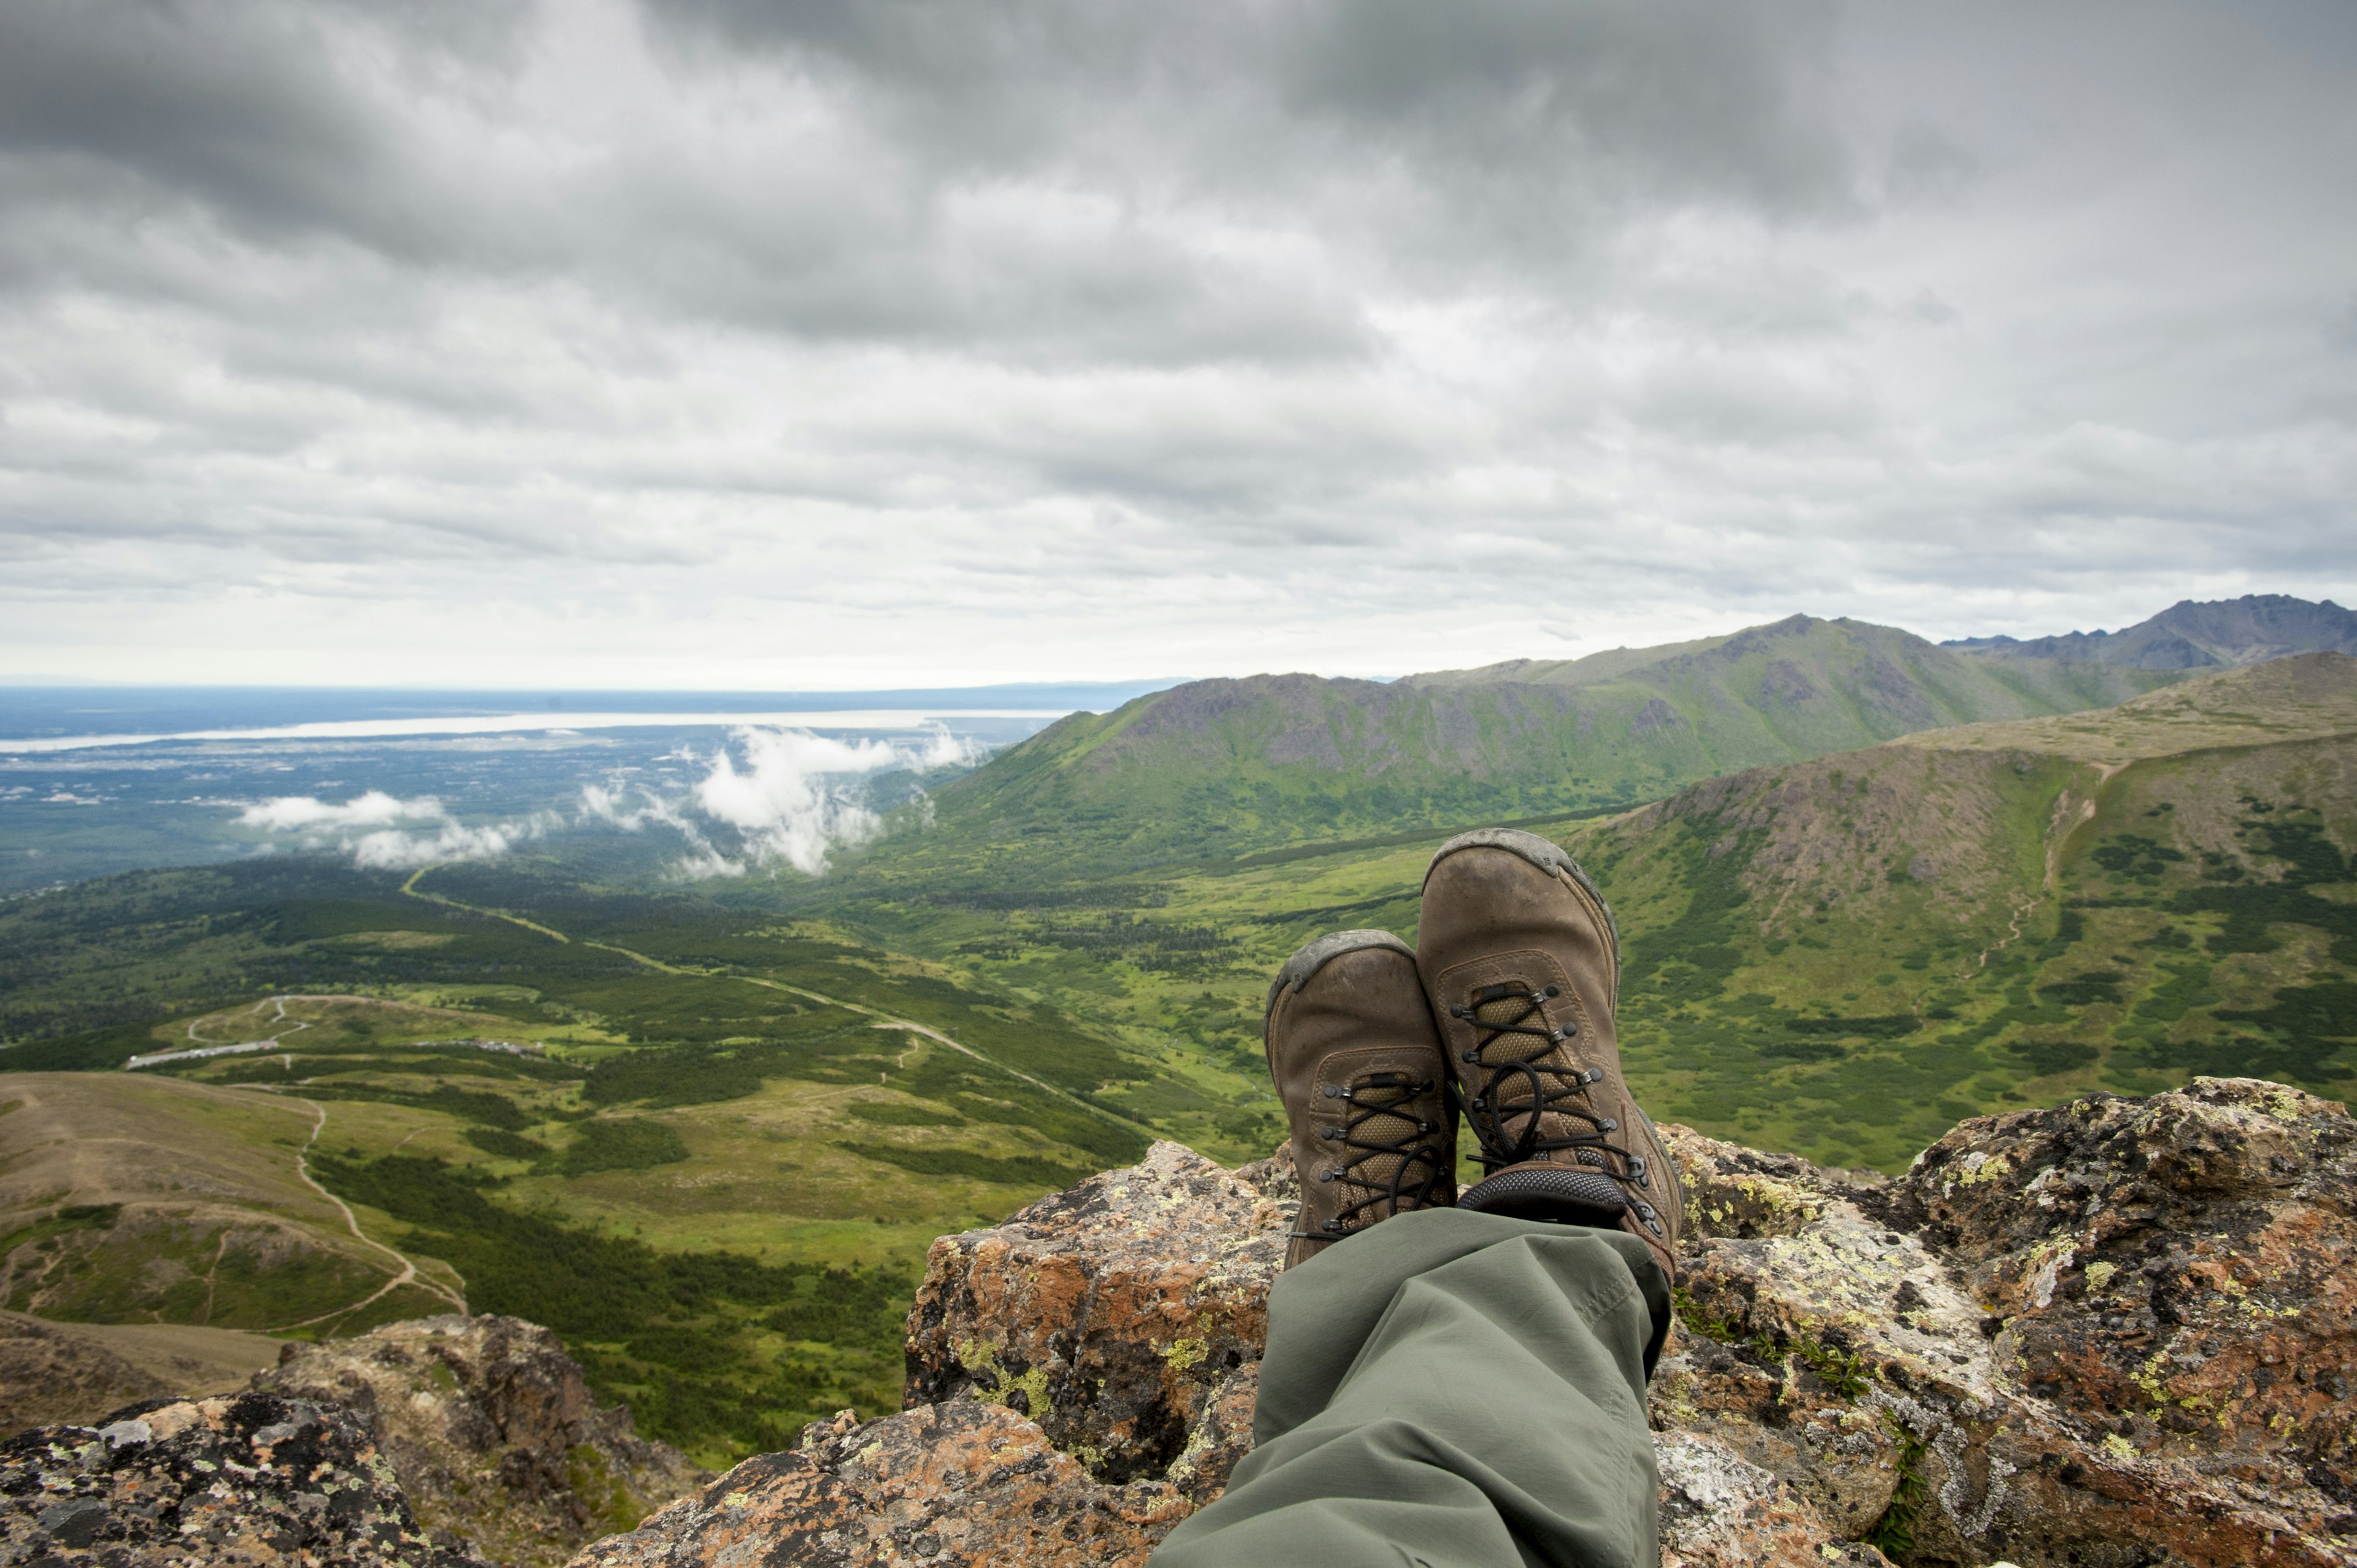 Climbers legs and feet on top of Flat Top Mountain trail, near Anchorage AK, Chugach Mountains.
Climbers legs and feet on top of Flat Top Mountain trail, near Anchorage AK, Chugach Mountains.. (Photo by: Edwin Remsburg/VW Pics via Getty Images)